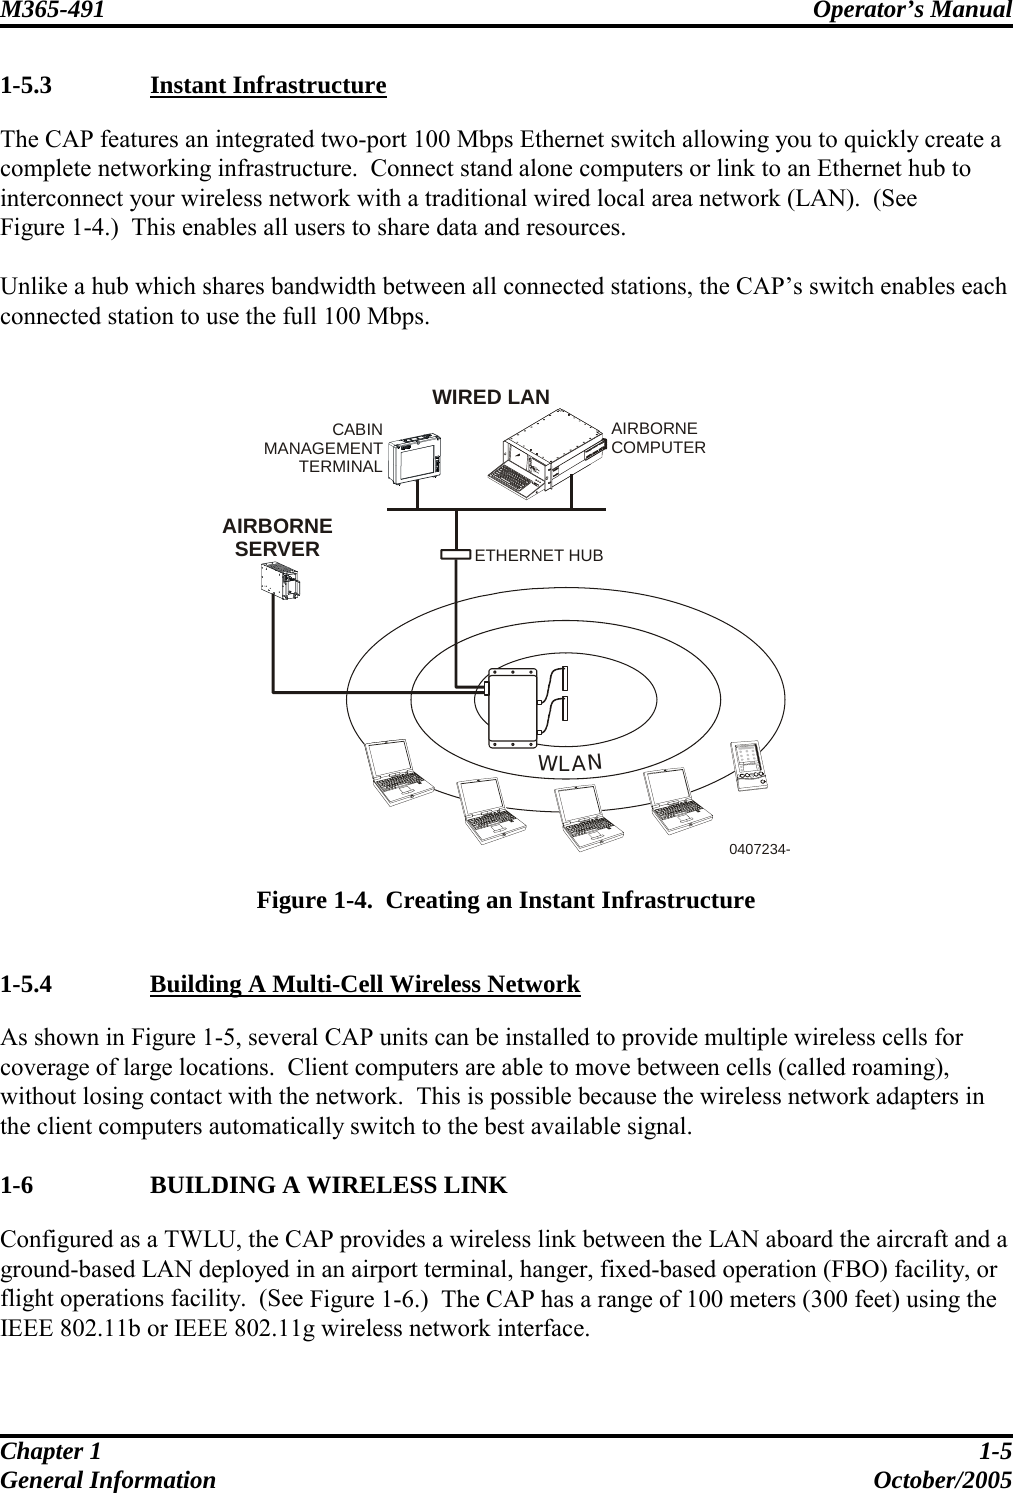 M365-491 Operator’s Manual   Chapter 1  1-5 General Information  October/2005 1-5.3  Instant Infrastructure The CAP features an integrated two-port 100 Mbps Ethernet switch allowing you to quickly create a complete networking infrastructure.  Connect stand alone computers or link to an Ethernet hub to interconnect your wireless network with a traditional wired local area network (LAN).  (See  Figure 1-4.)  This enables all users to share data and resources.  Unlike a hub which shares bandwidth between all connected stations, the CAP’s switch enables each connected station to use the full 100 Mbps.   WLANETHERNET HUB0407234-WIRED LANAIRBORNESERVERCABINMANAGEMENTTERMINALAIRBORNECOMPUTER  Figure 1-4.  Creating an Instant Infrastructure  1-5.4   Building A Multi-Cell Wireless Network As shown in Figure 1-5, several CAP units can be installed to provide multiple wireless cells for coverage of large locations.  Client computers are able to move between cells (called roaming), without losing contact with the network.  This is possible because the wireless network adapters in the client computers automatically switch to the best available signal.  1-6   BUILDING A WIRELESS LINK Configured as a TWLU, the CAP provides a wireless link between the LAN aboard the aircraft and a ground-based LAN deployed in an airport terminal, hanger, fixed-based operation (FBO) facility, or flight operations facility.  (See Figure 1-6.)  The CAP has a range of 100 meters (300 feet) using the IEEE 802.11b or IEEE 802.11g wireless network interface.  